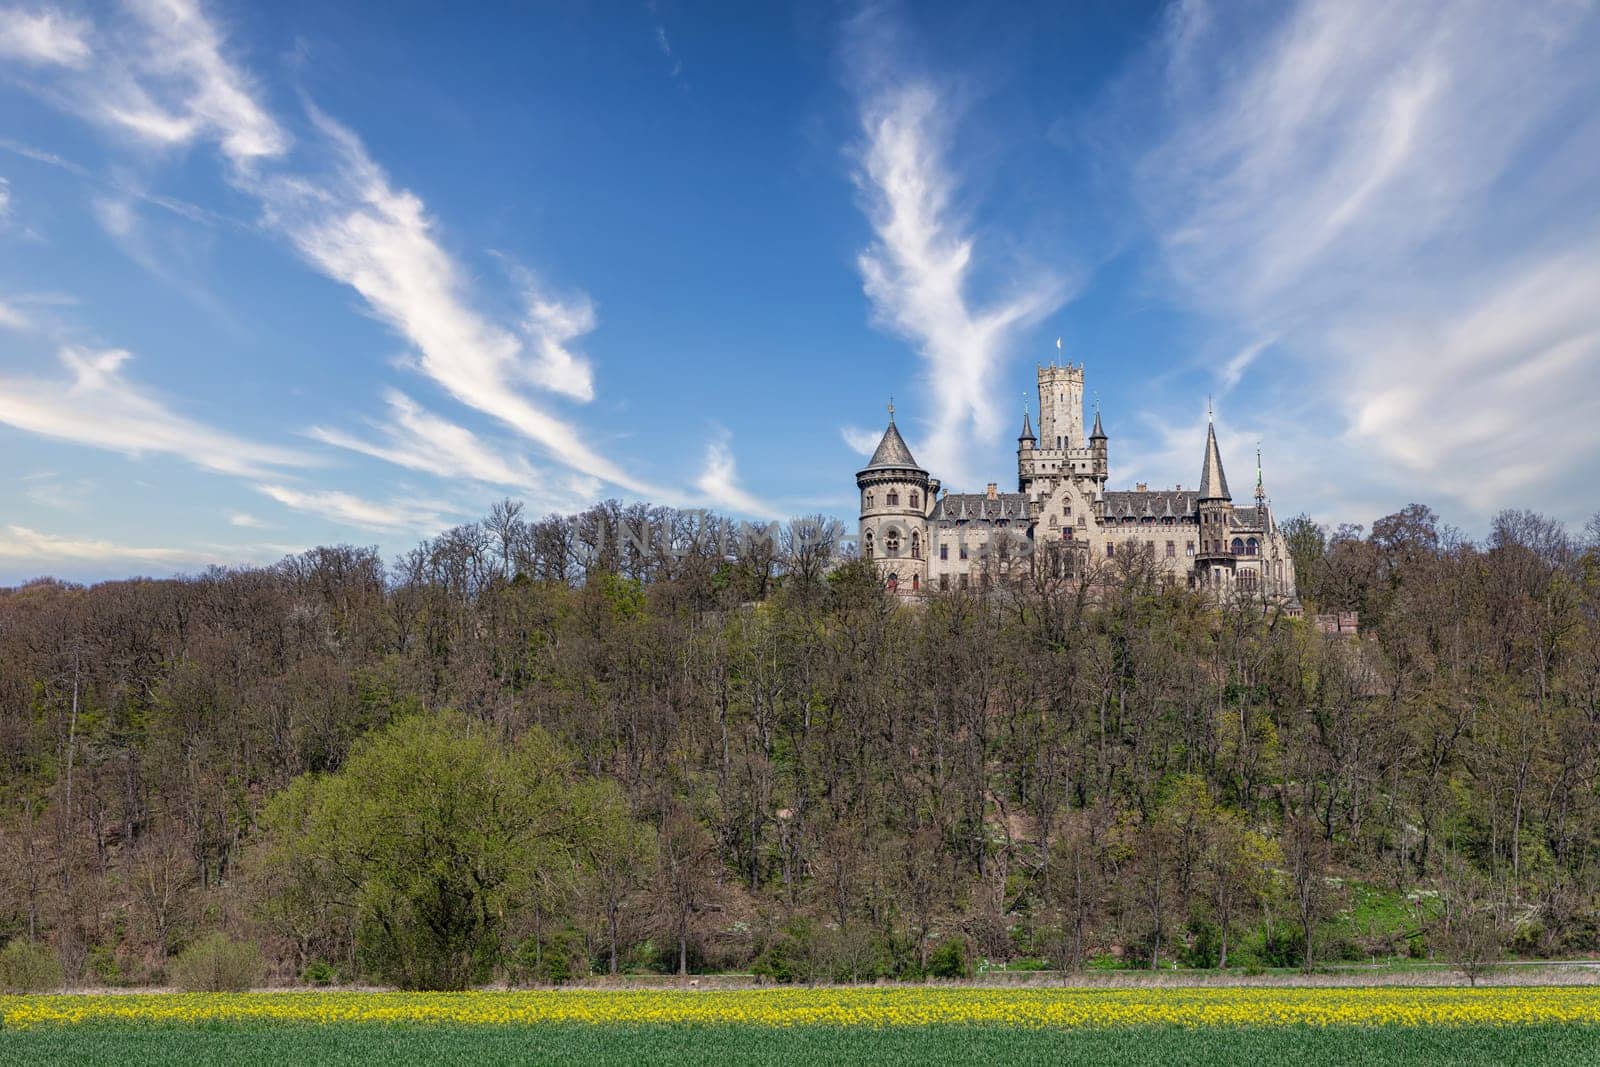 View of a Gothic revival Marienburg castle in Lower Saxony, Germany